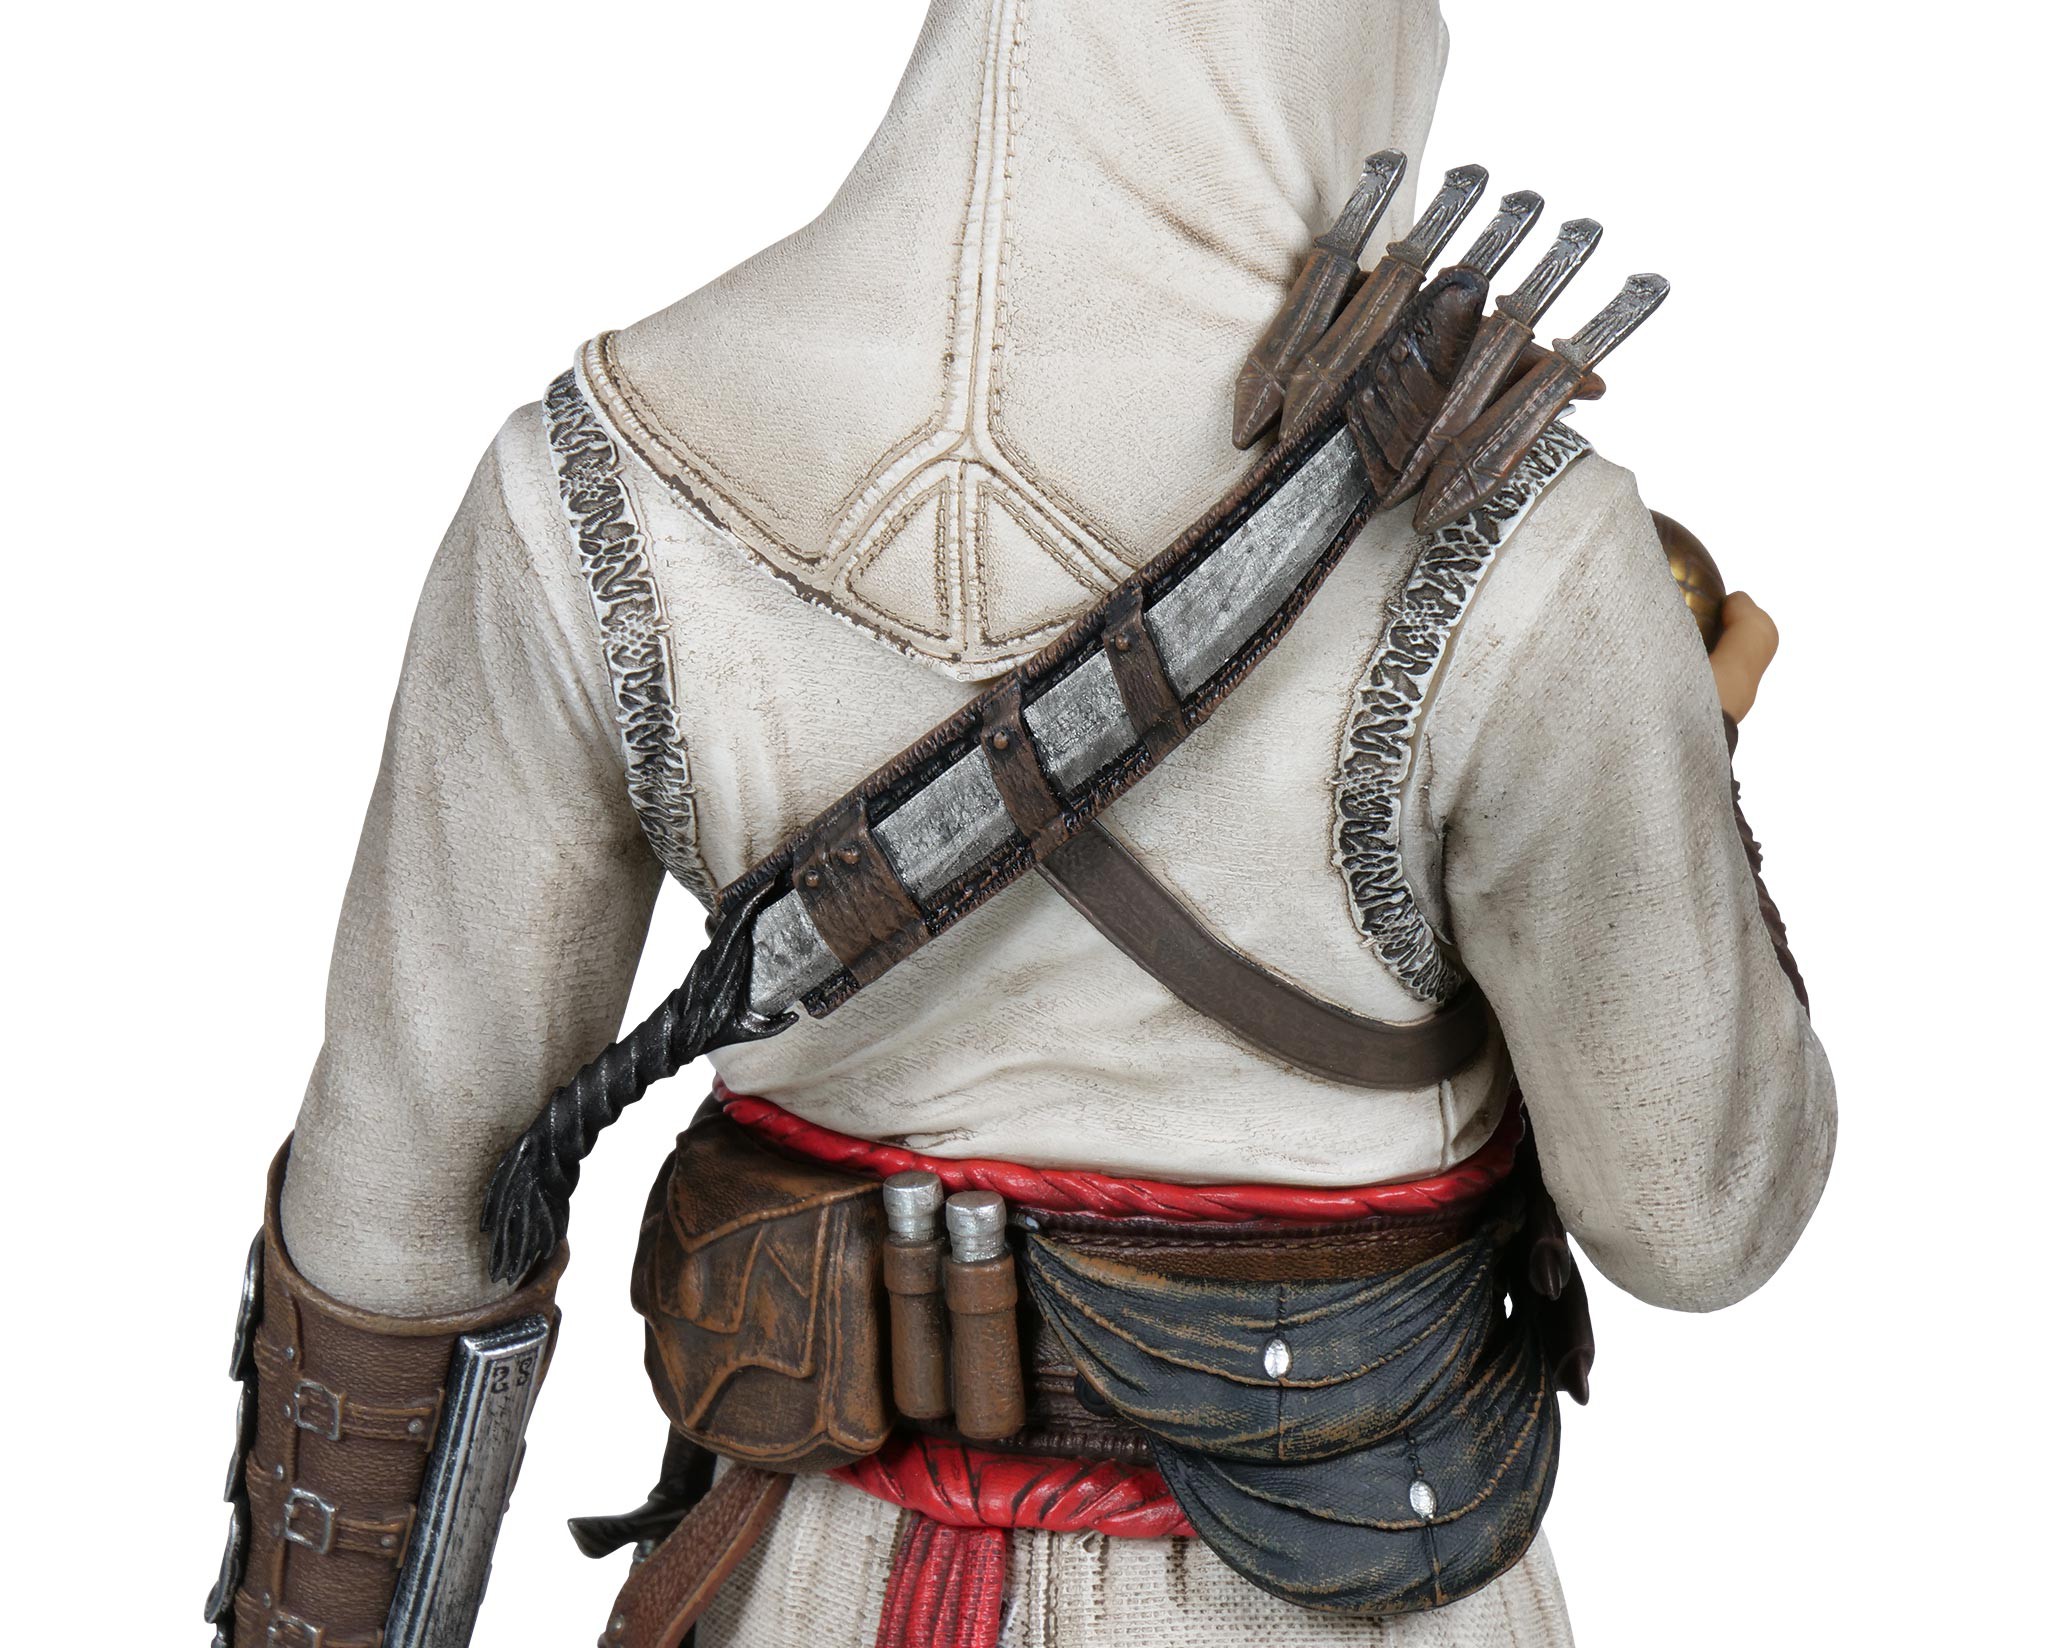 Altair Figurine: Apple of Eden Keeper - Assassin's Creed